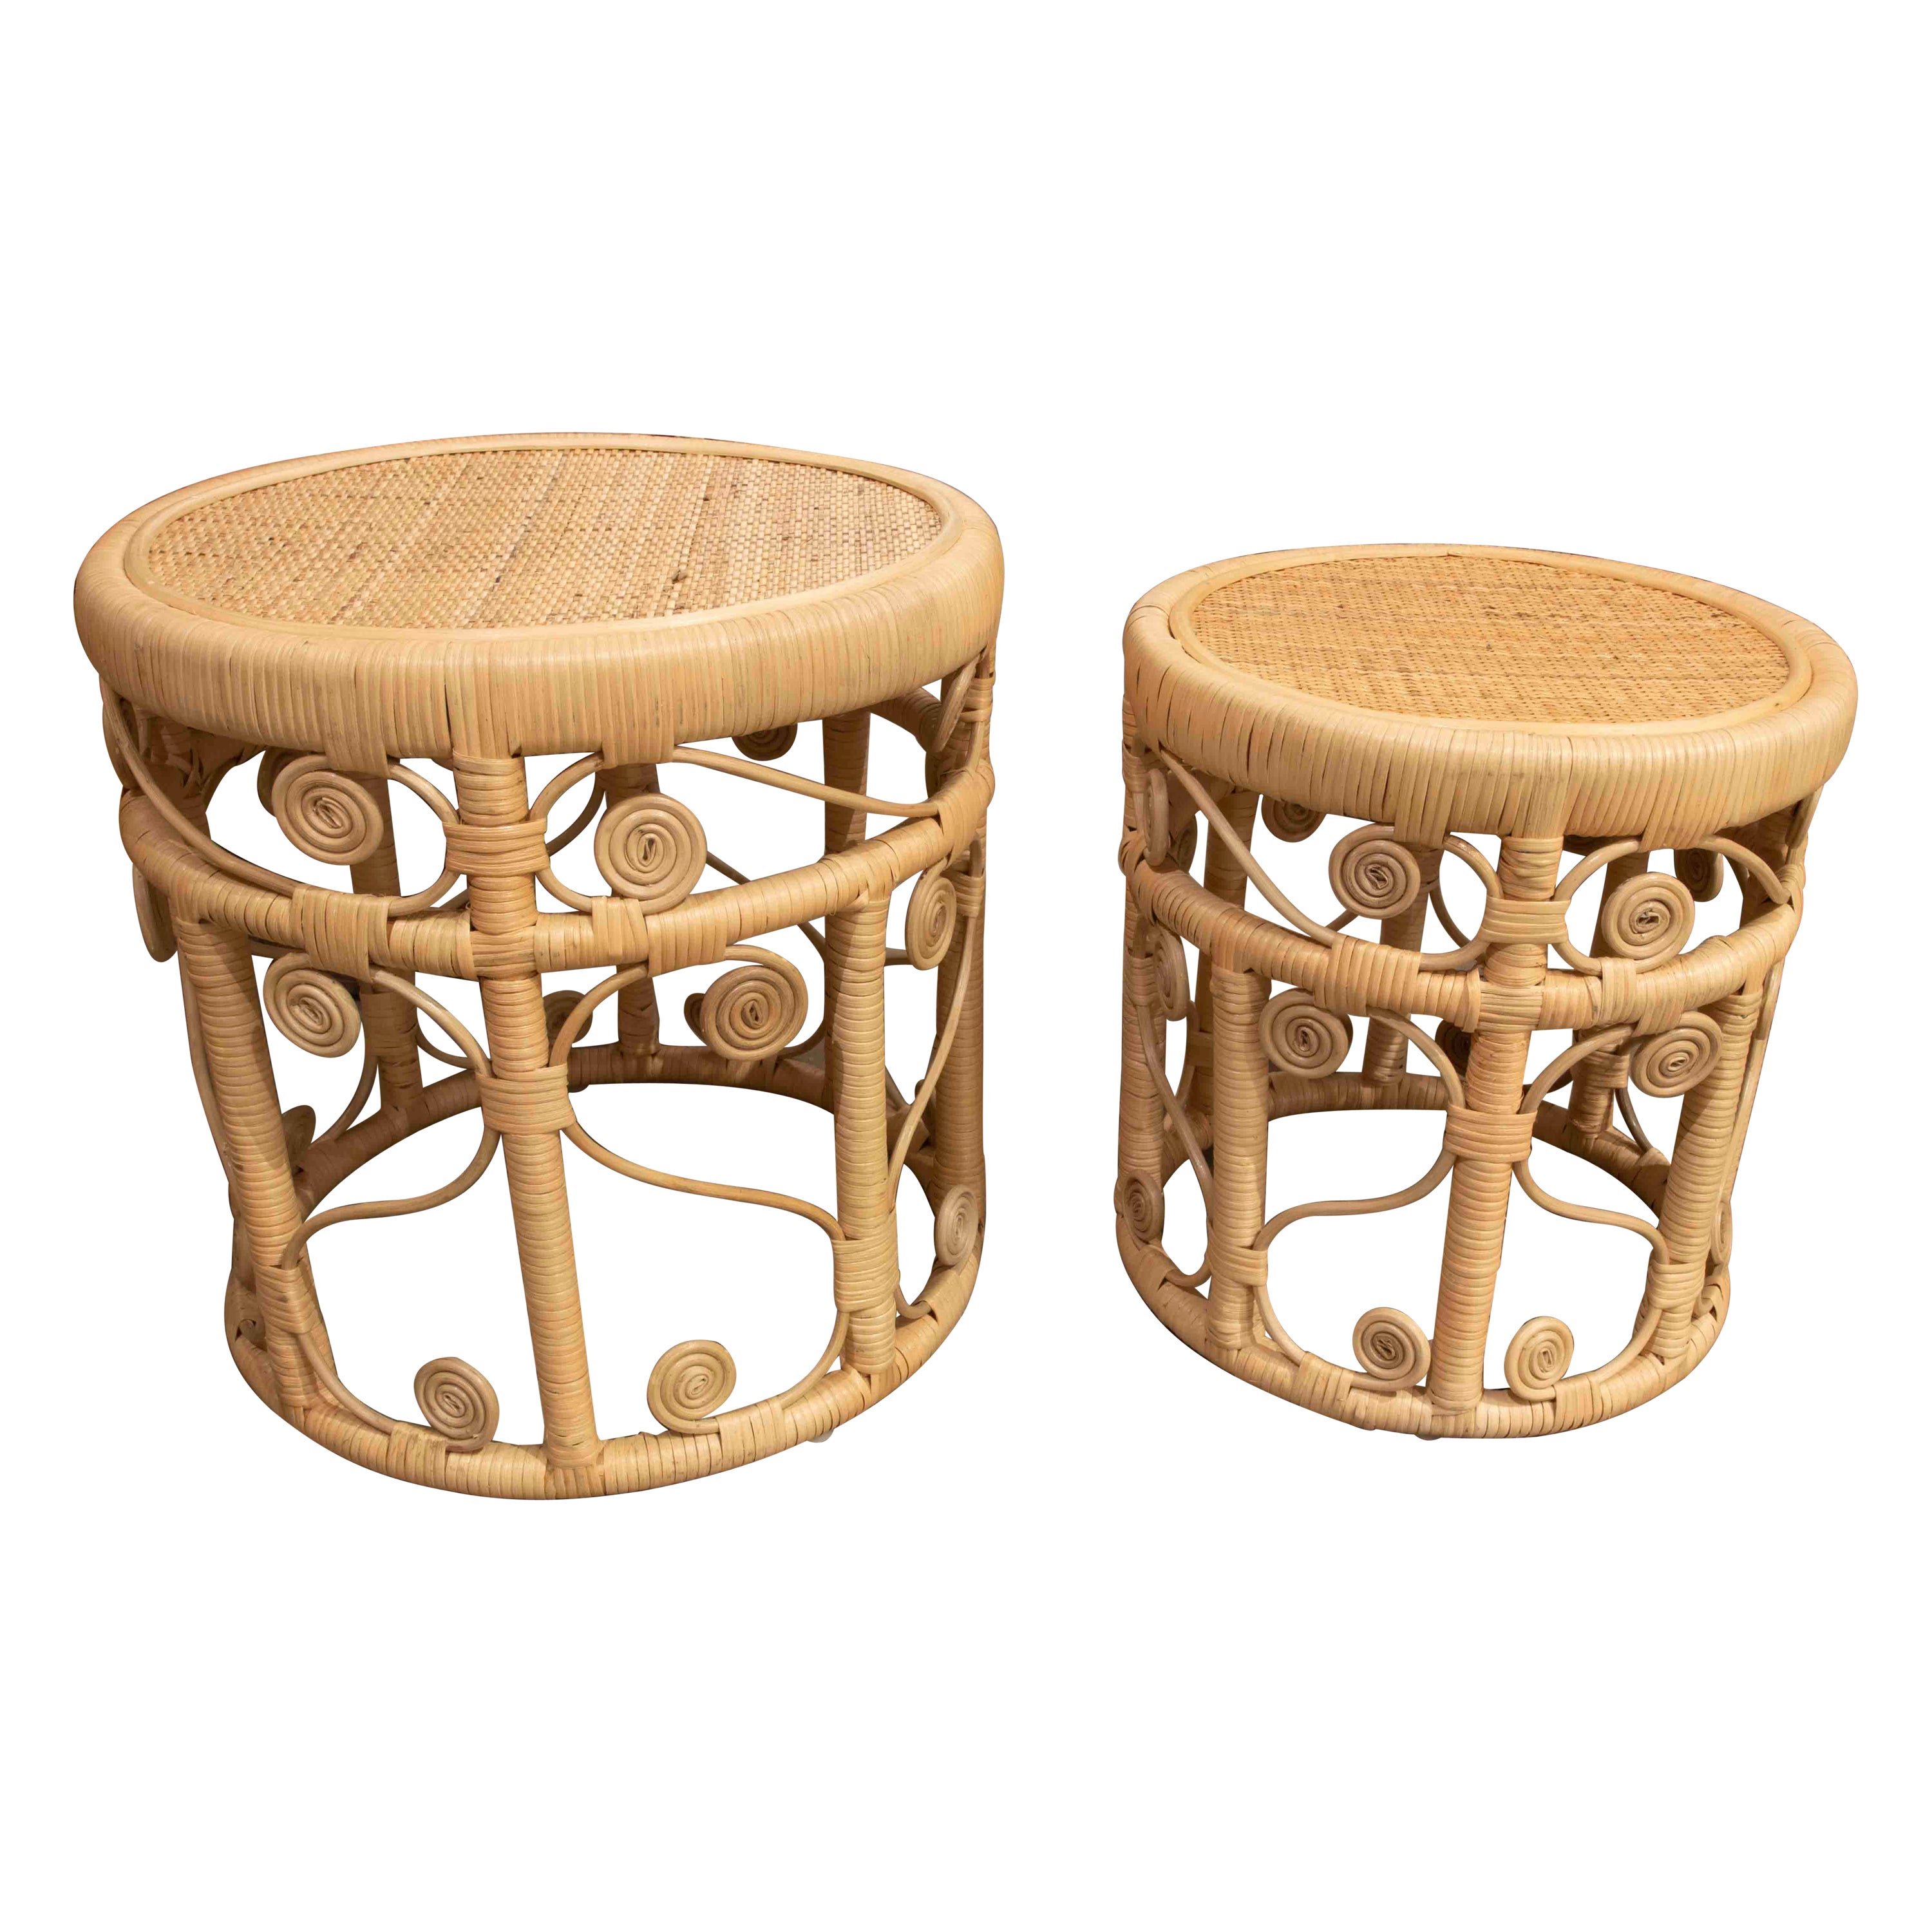 Pair of Handmade Rattan and Wicker Round Benches